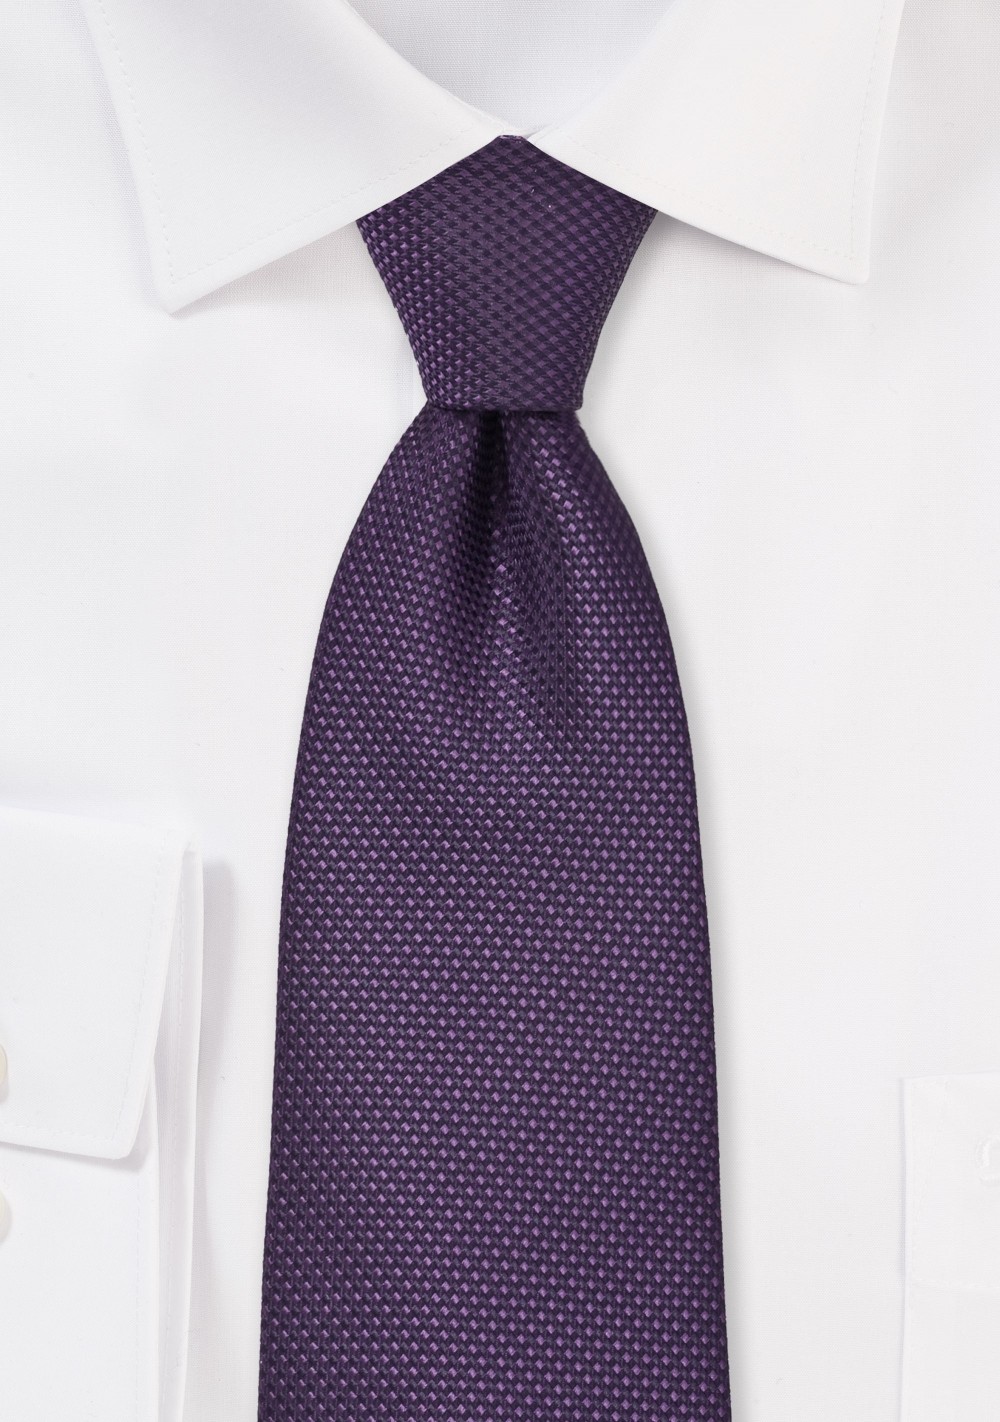 Grape Colored Tie with Textured Weave in Kids Size